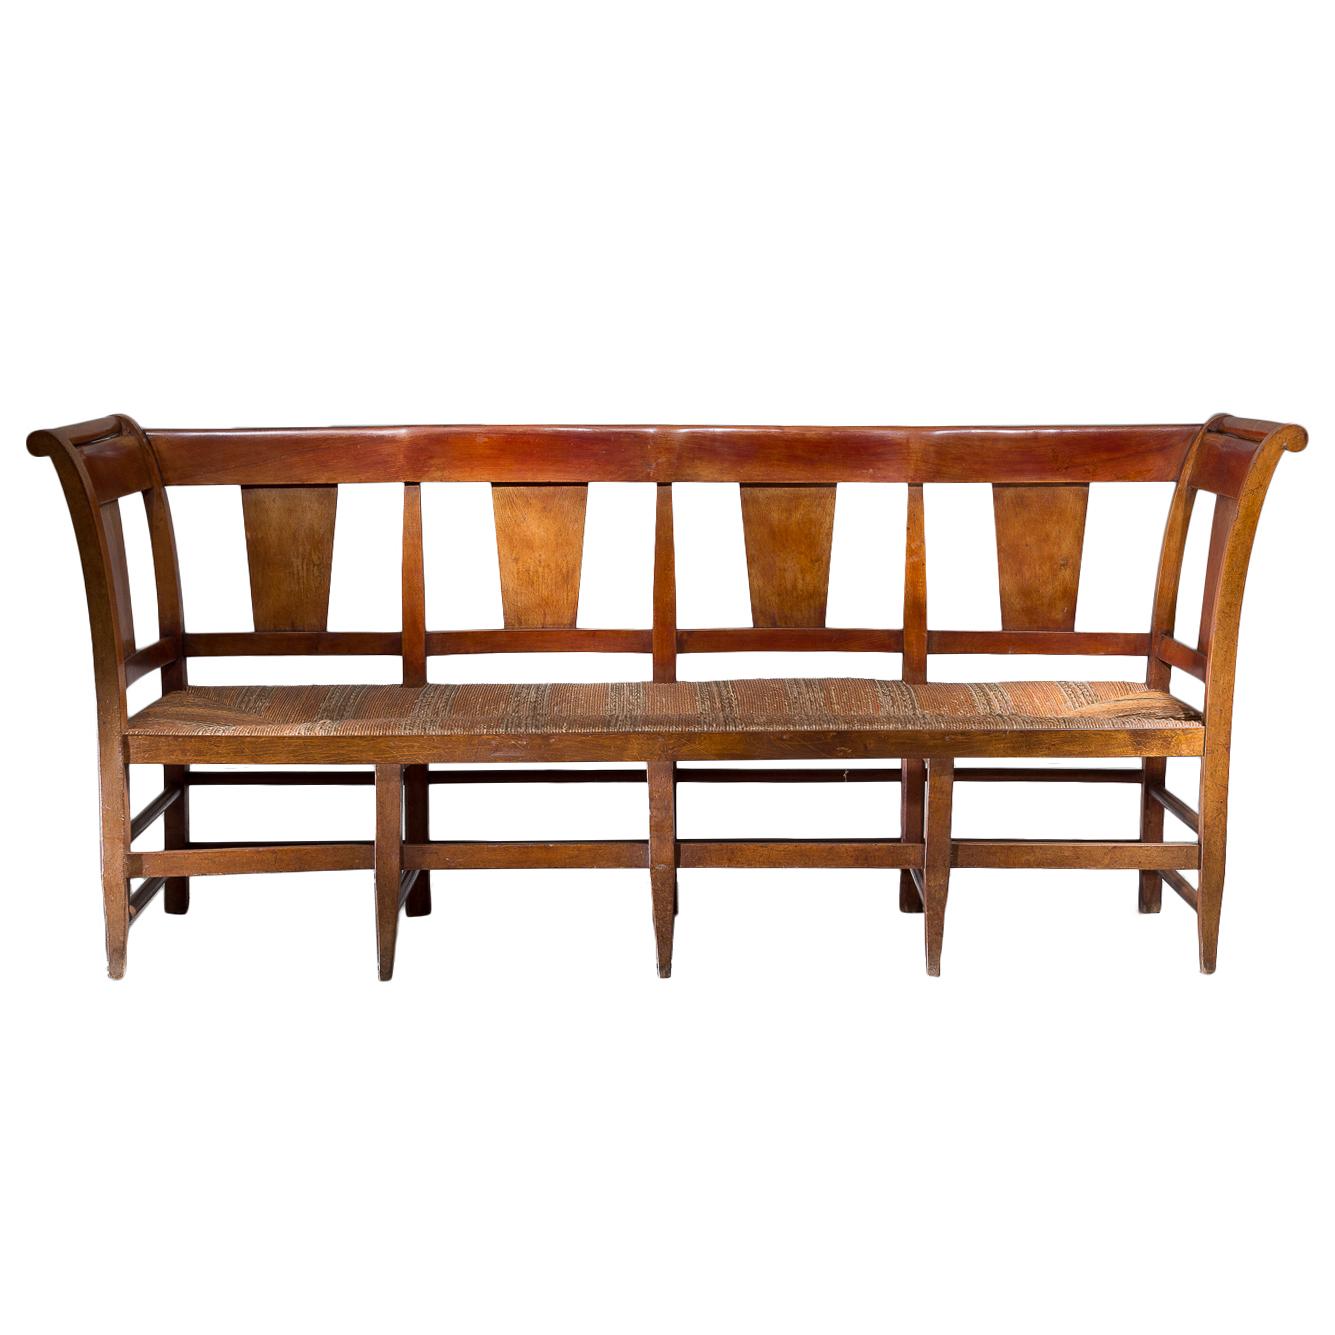 19th Century, French Fruitwood Bench